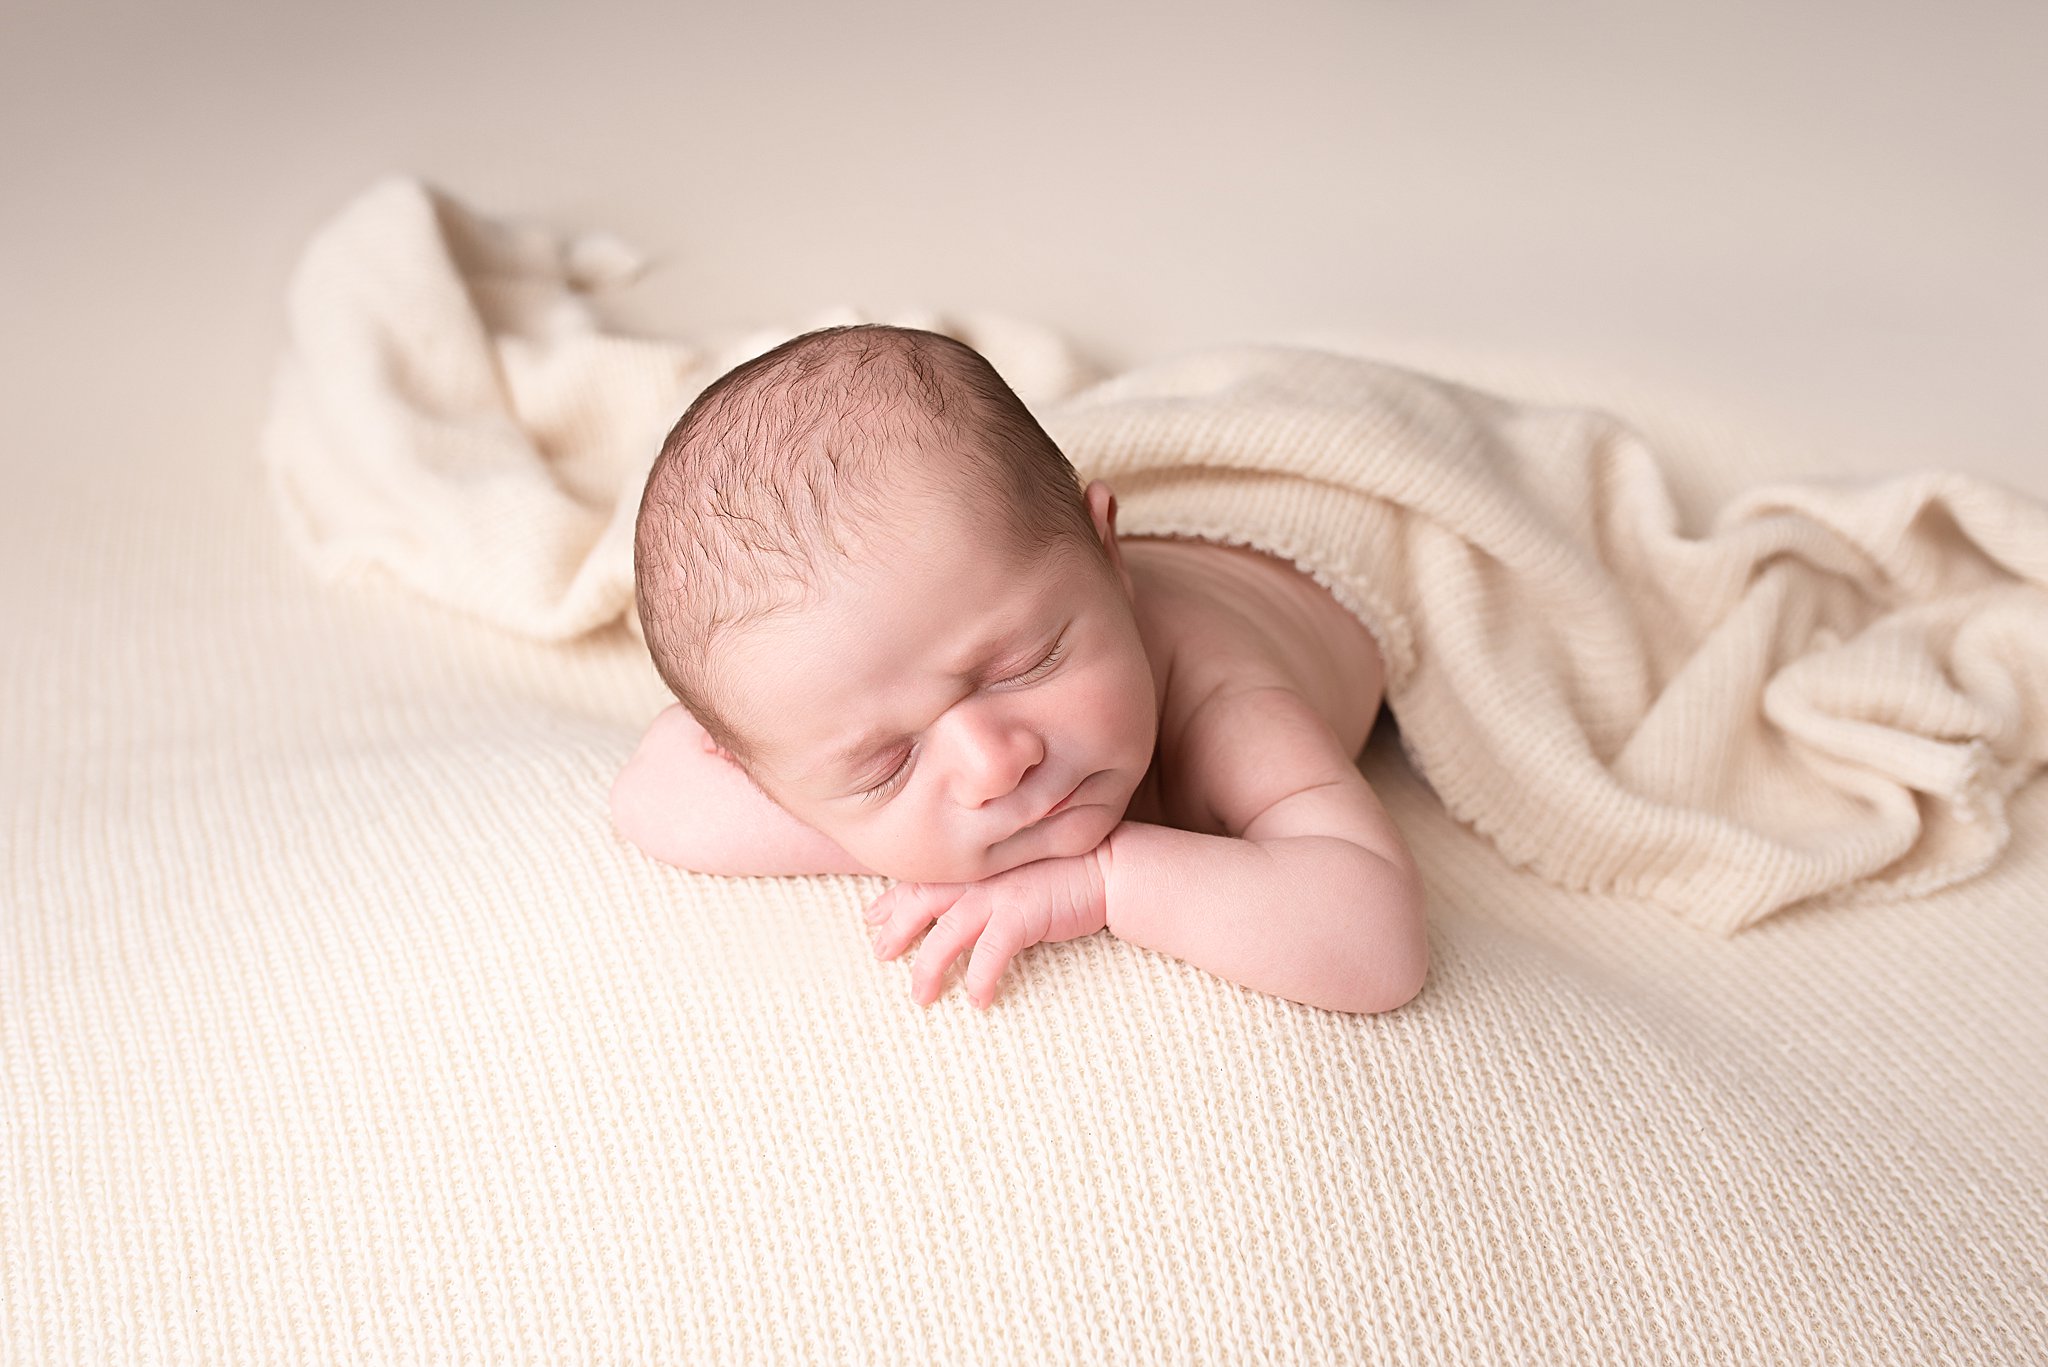 A newborn baby sleeps on its belly on a cream bed